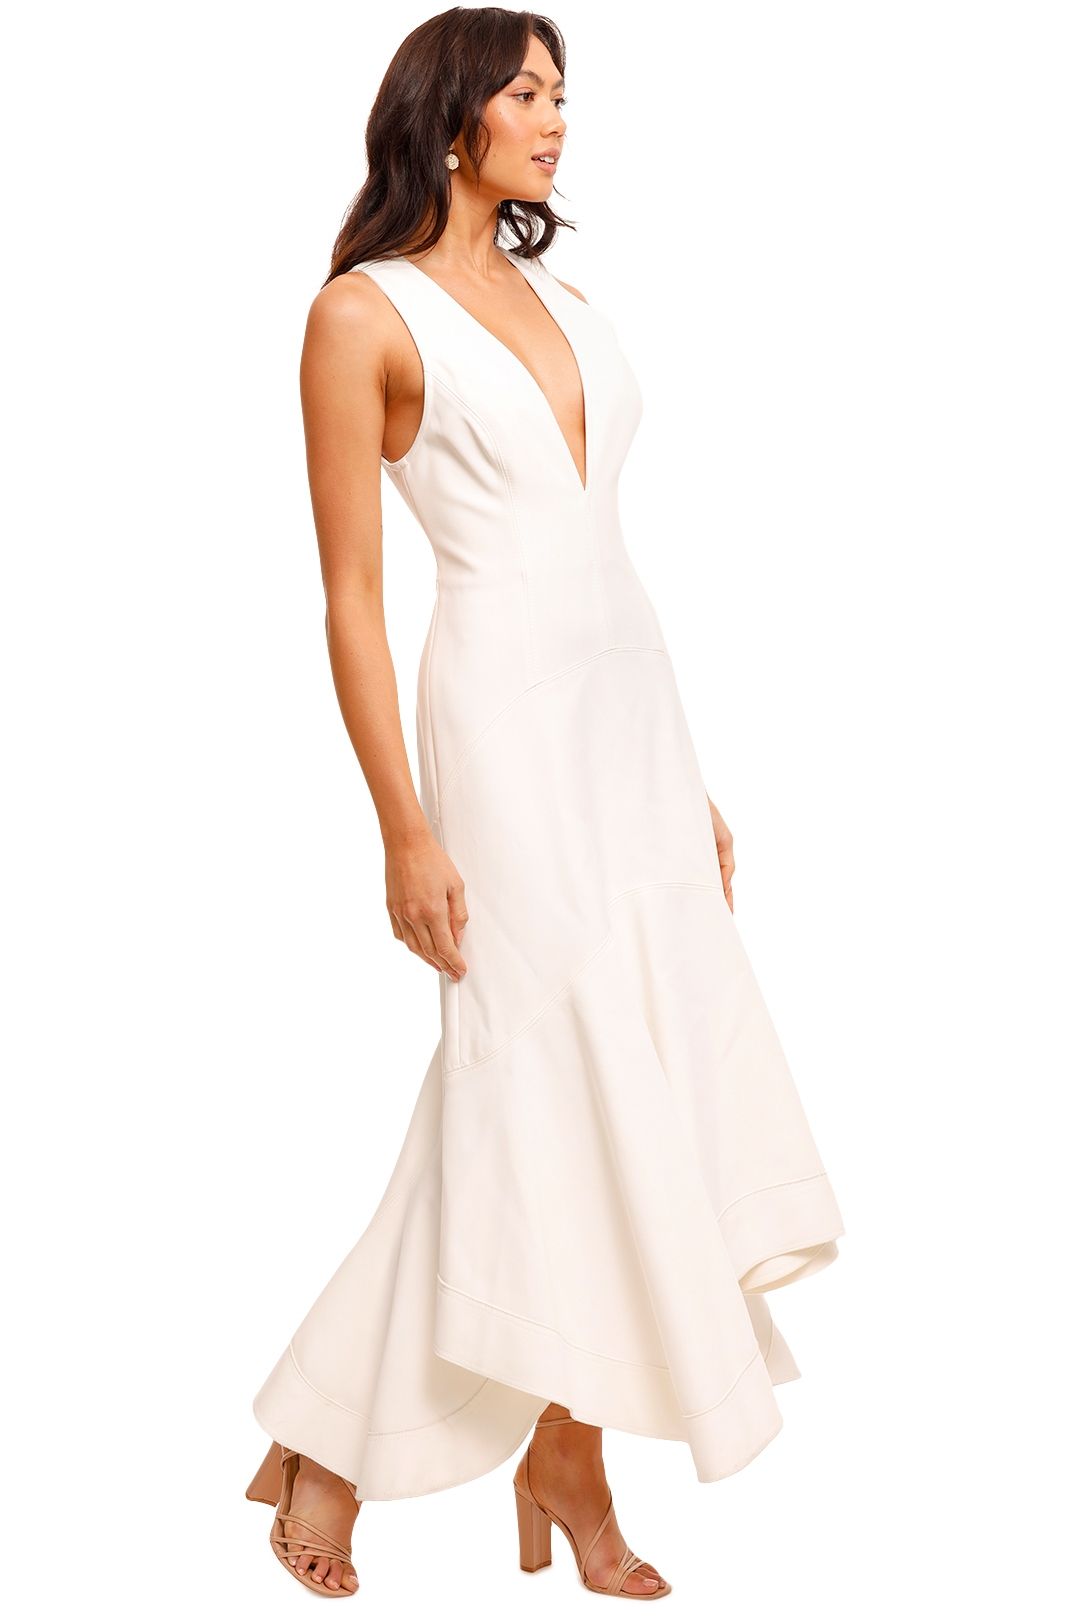 Acler Normandie Dress White